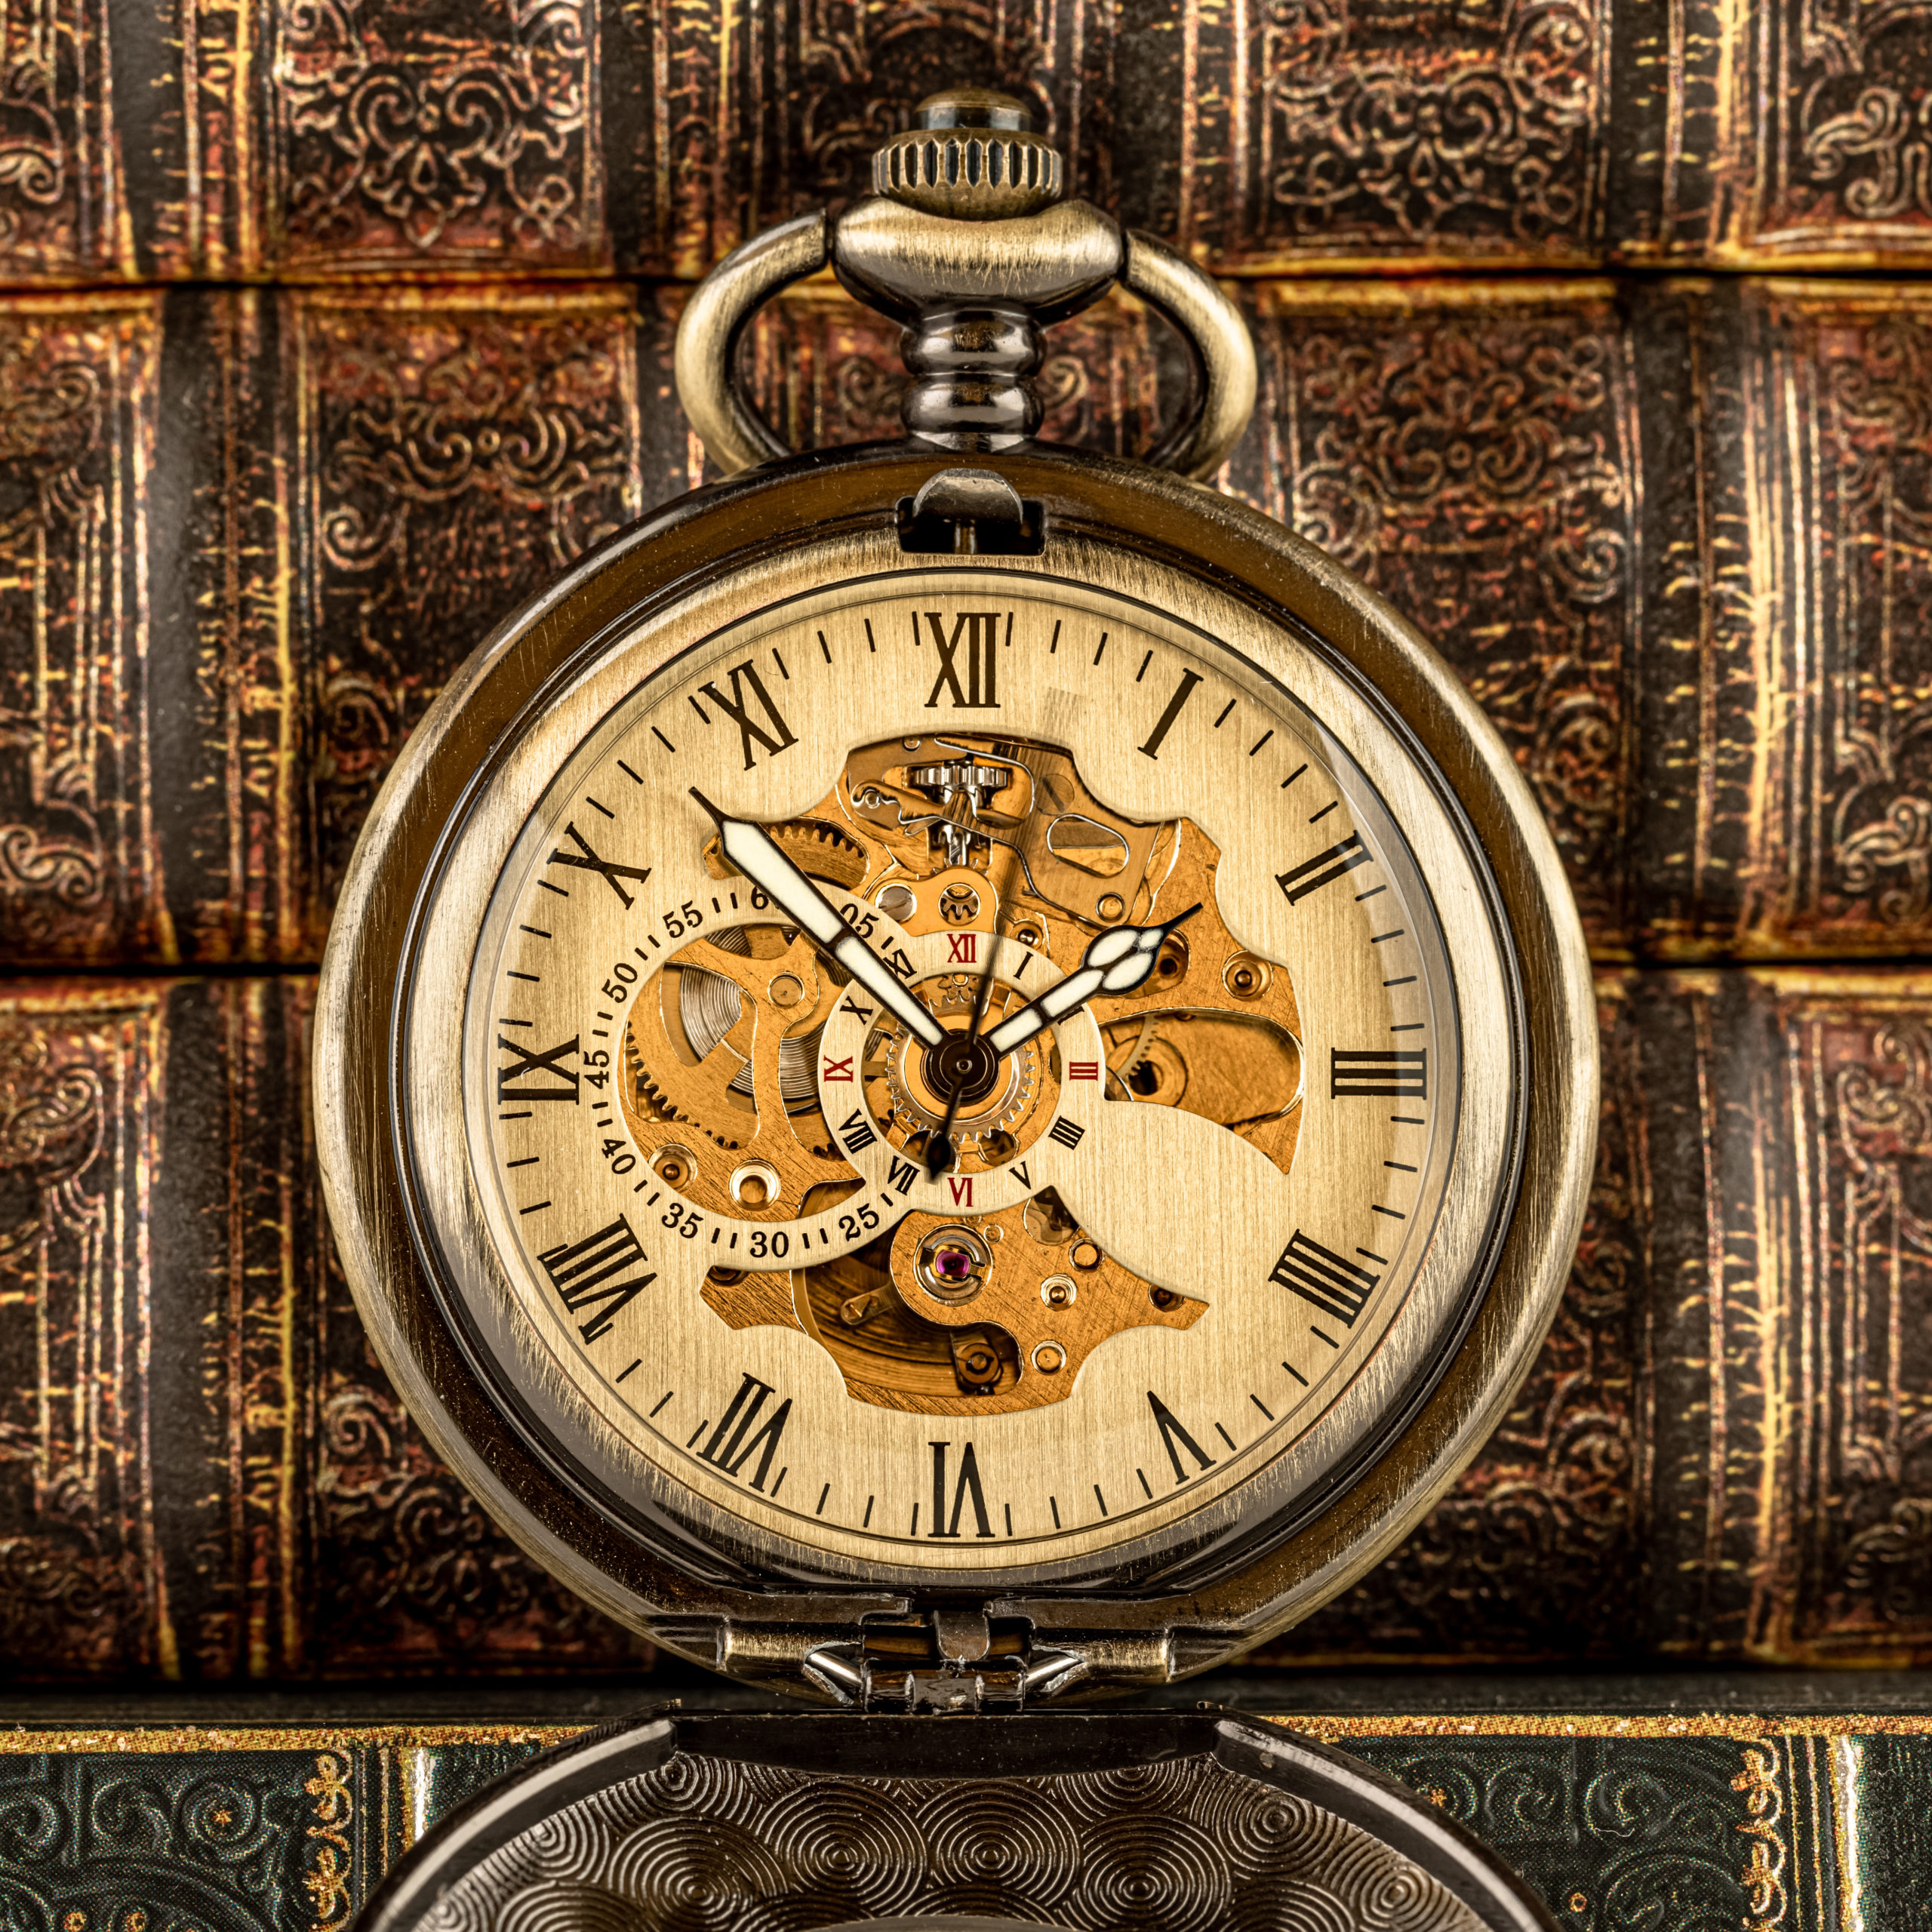 https://academicpartnership.ch/wp-content/uploads/2023/03/antique-clock-dial-close-up-vintage-pocket-watch-2021-08-30-19-01-24-utc-scaled.jpg